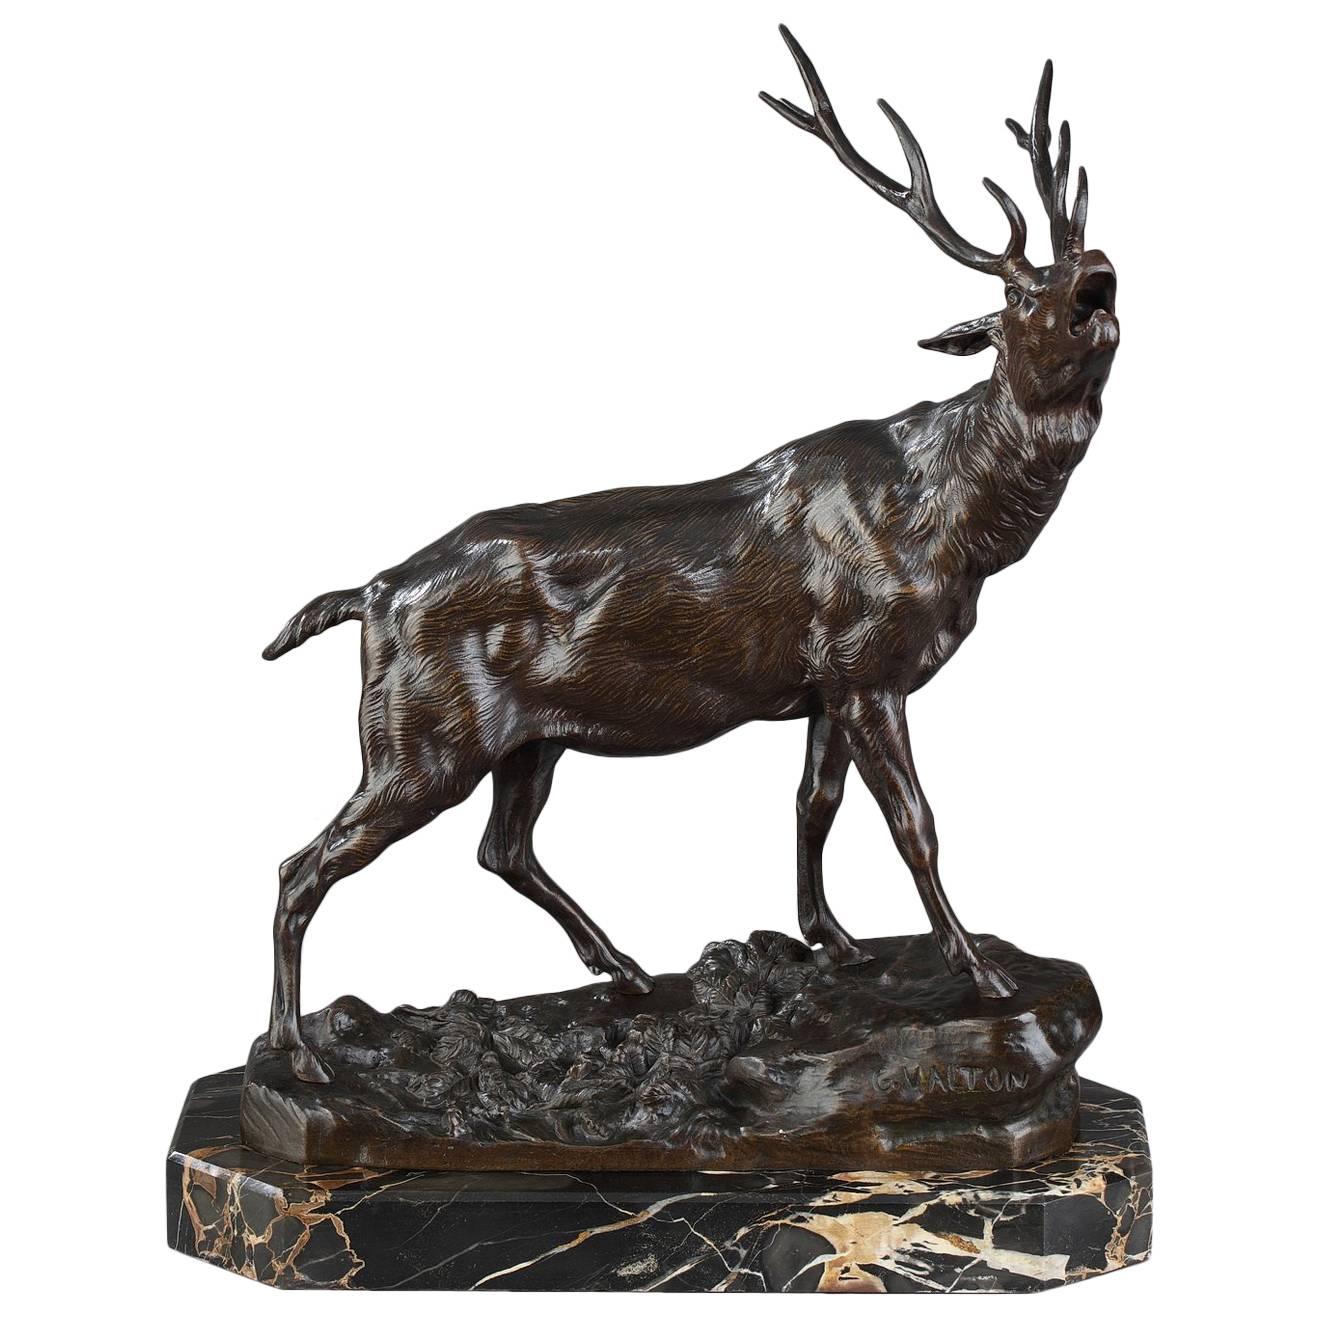 Bronze Sculpture "The Calling Stag" by Charles Valton